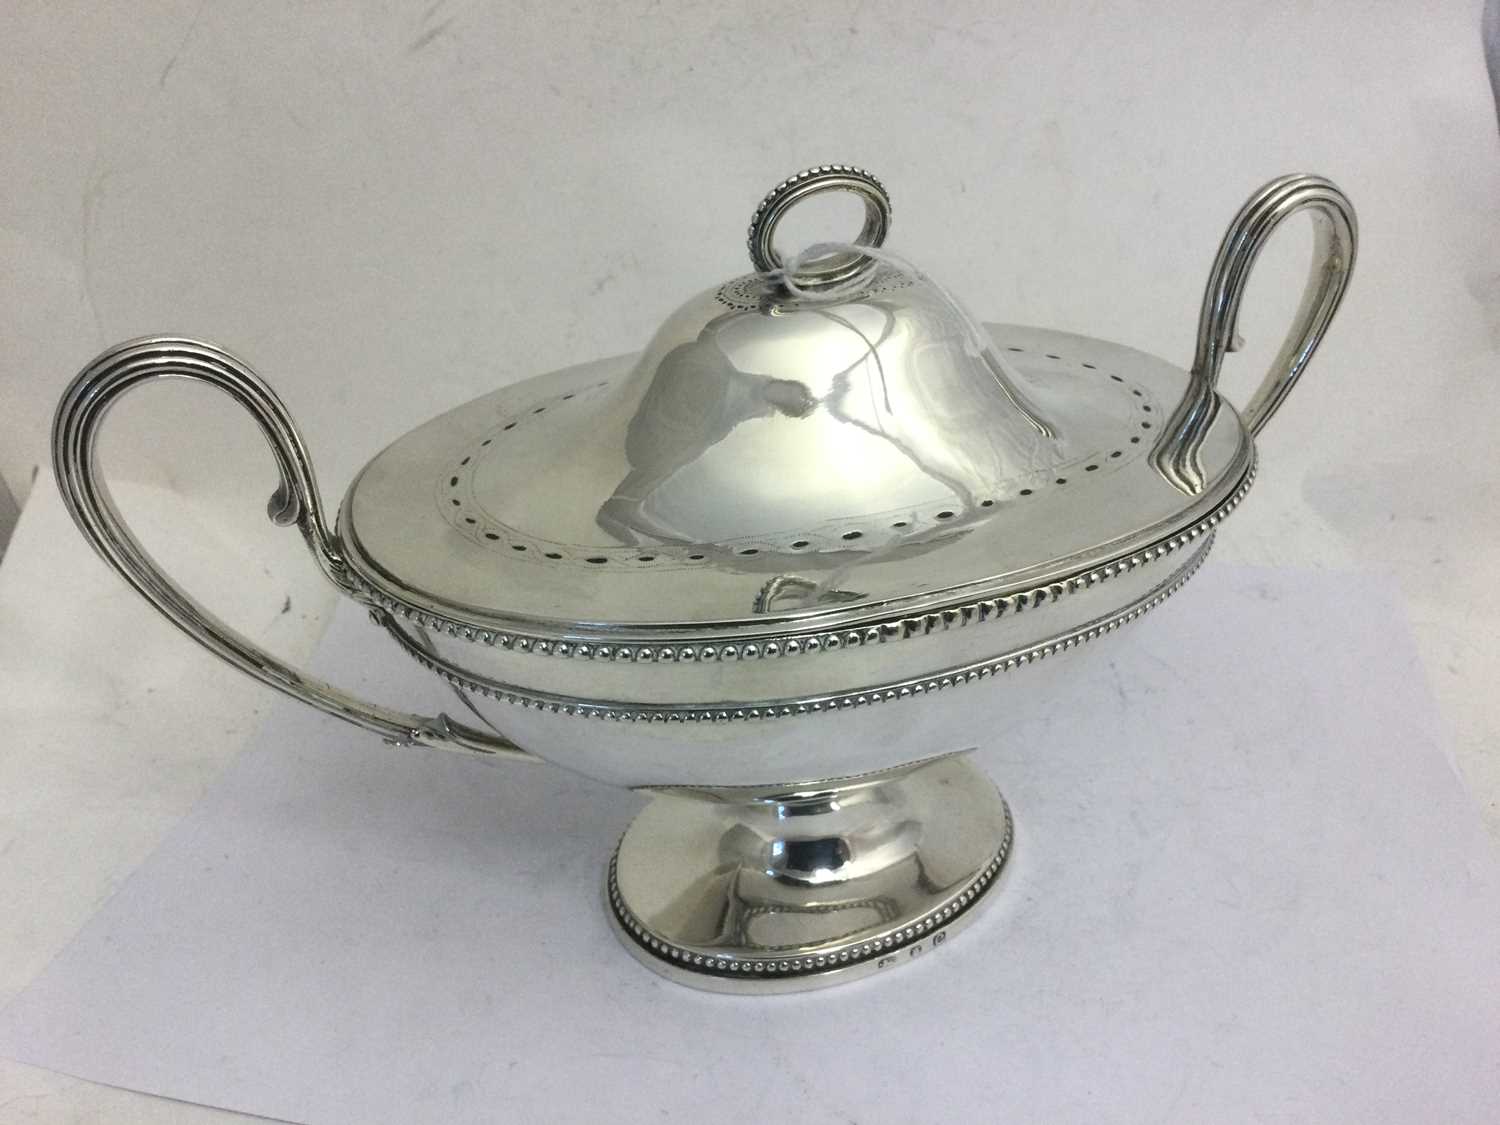 A George III Silver Sauce-Tureen and Cover, Probably by Robert Hennell, London, 1778 - Image 3 of 7